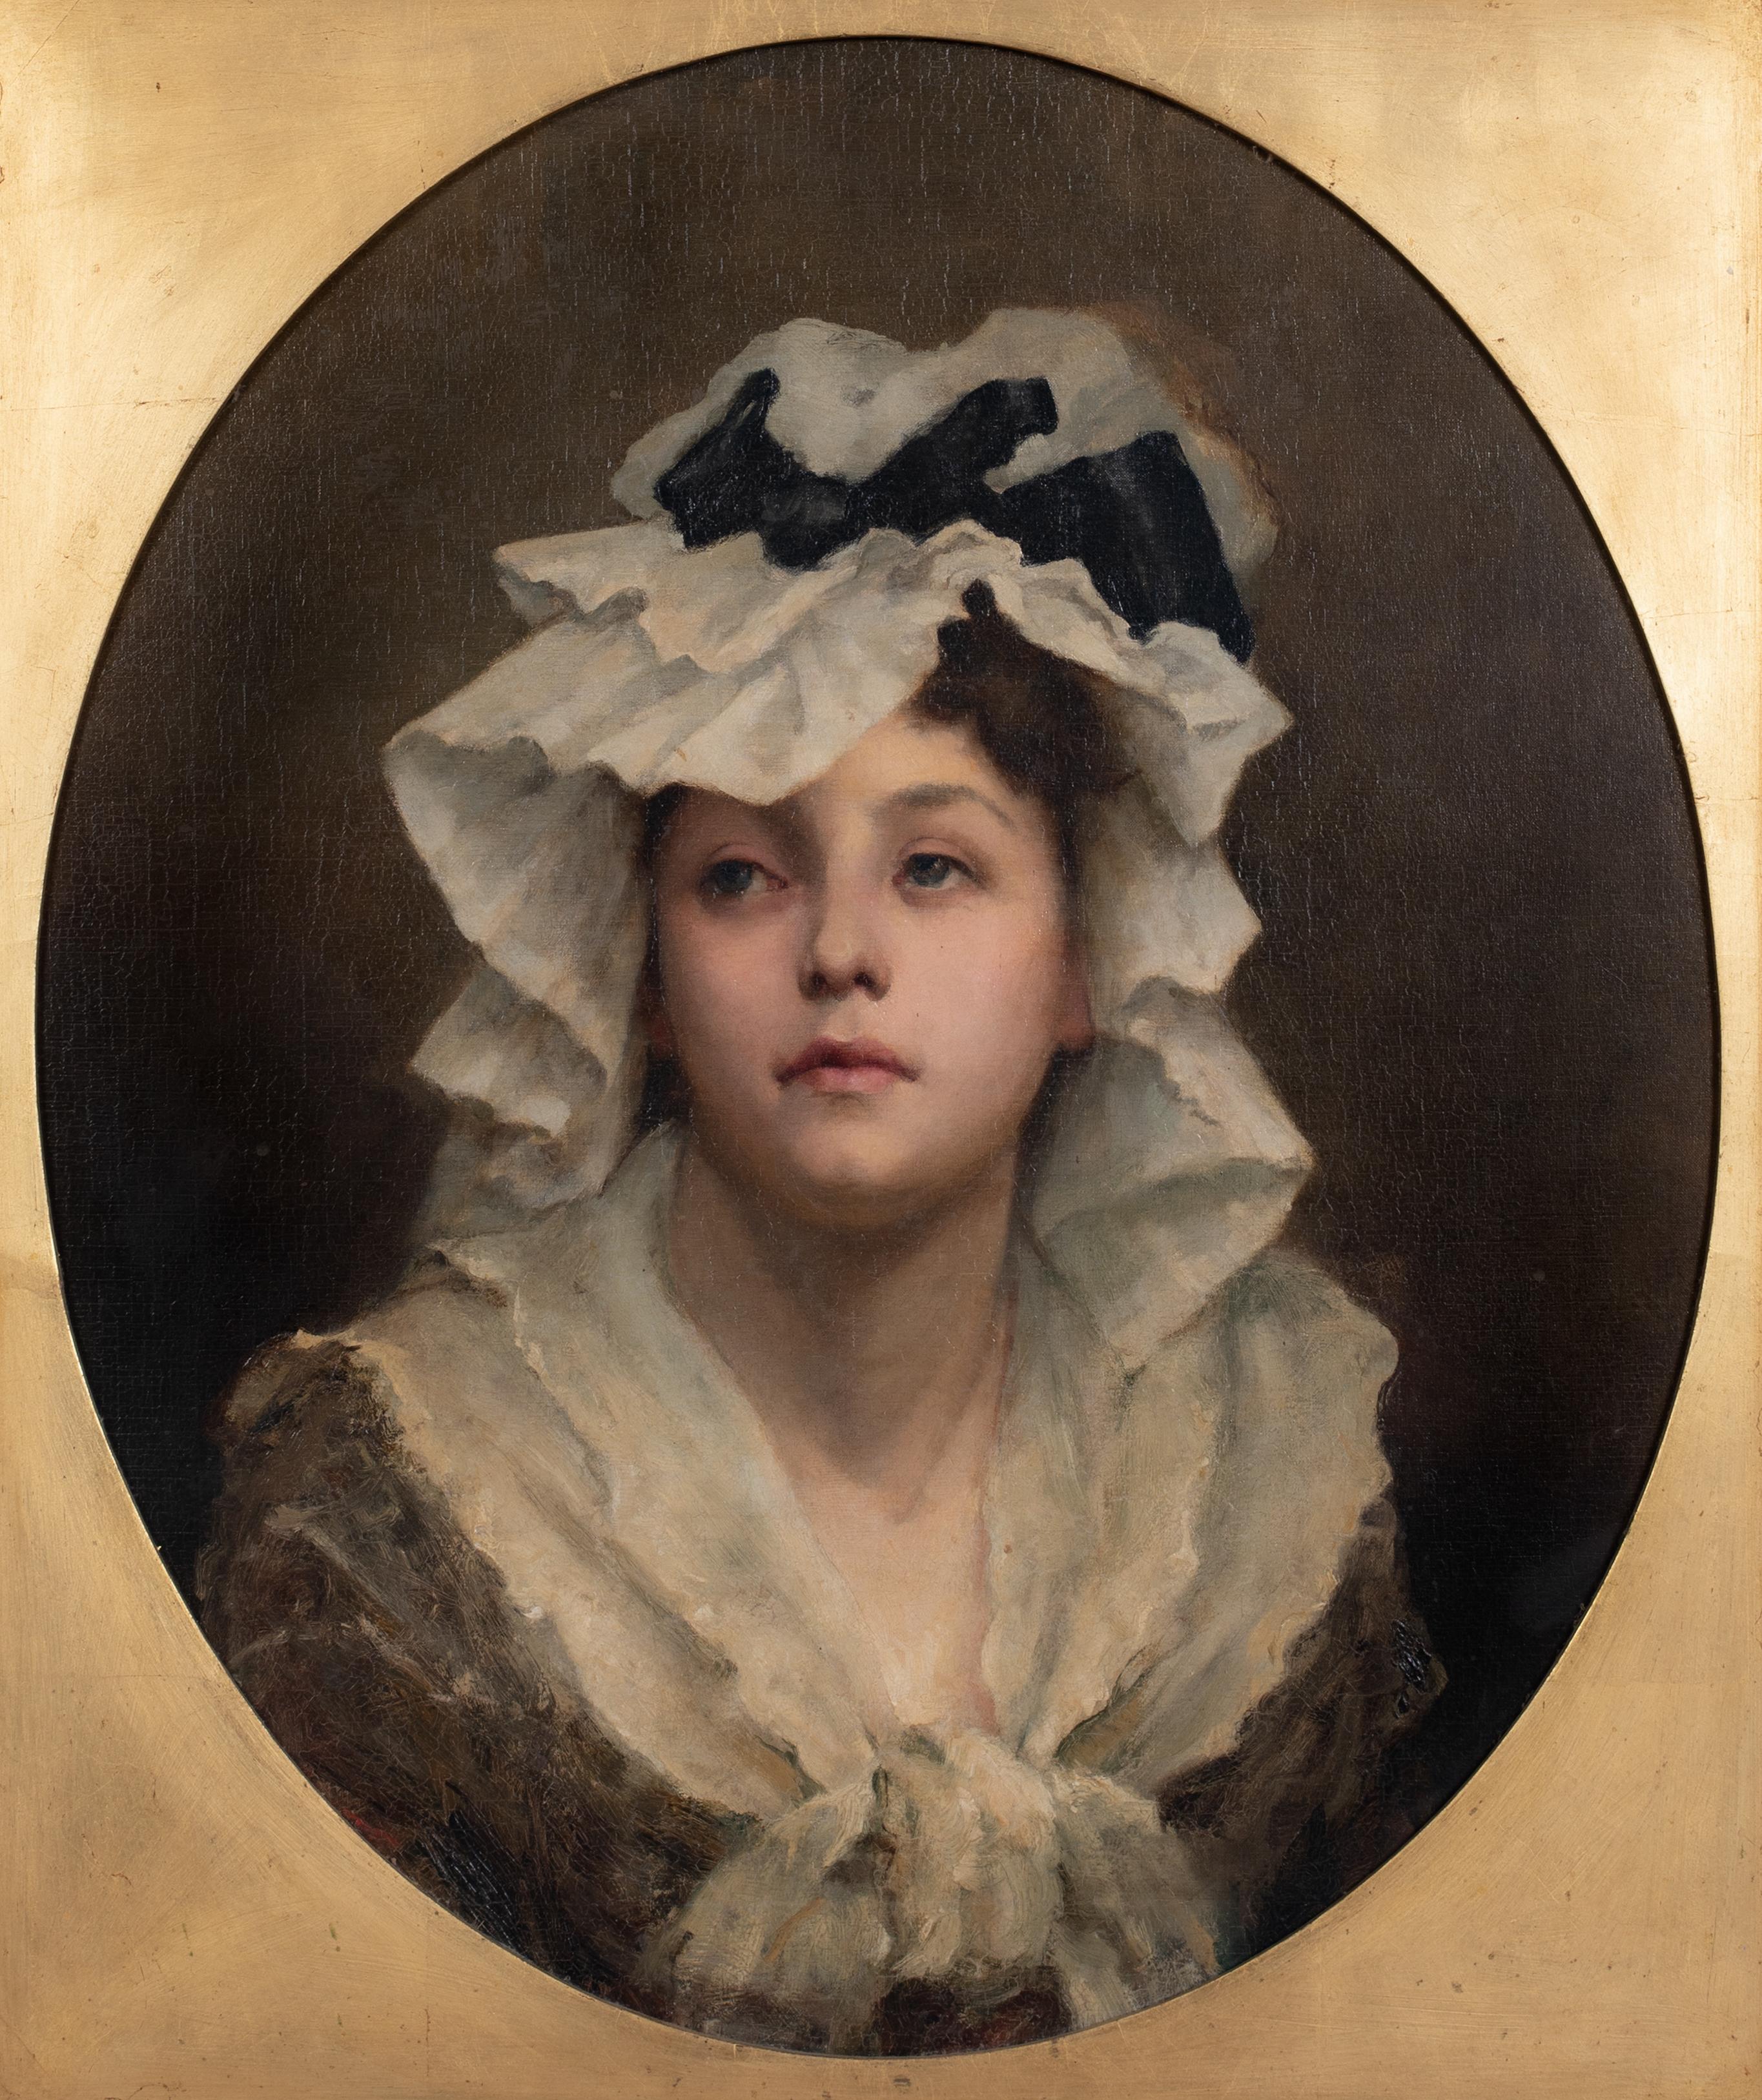 The Bonnet, 19th Century 

Monogrammed G.E.M

Large 19th Century portrait of a young girl wearing an elaborate bonnet, oil on canvas signed G E M. Excellent quality and condition beautiful Victorian portrait of the young girl in her bonnet. Would